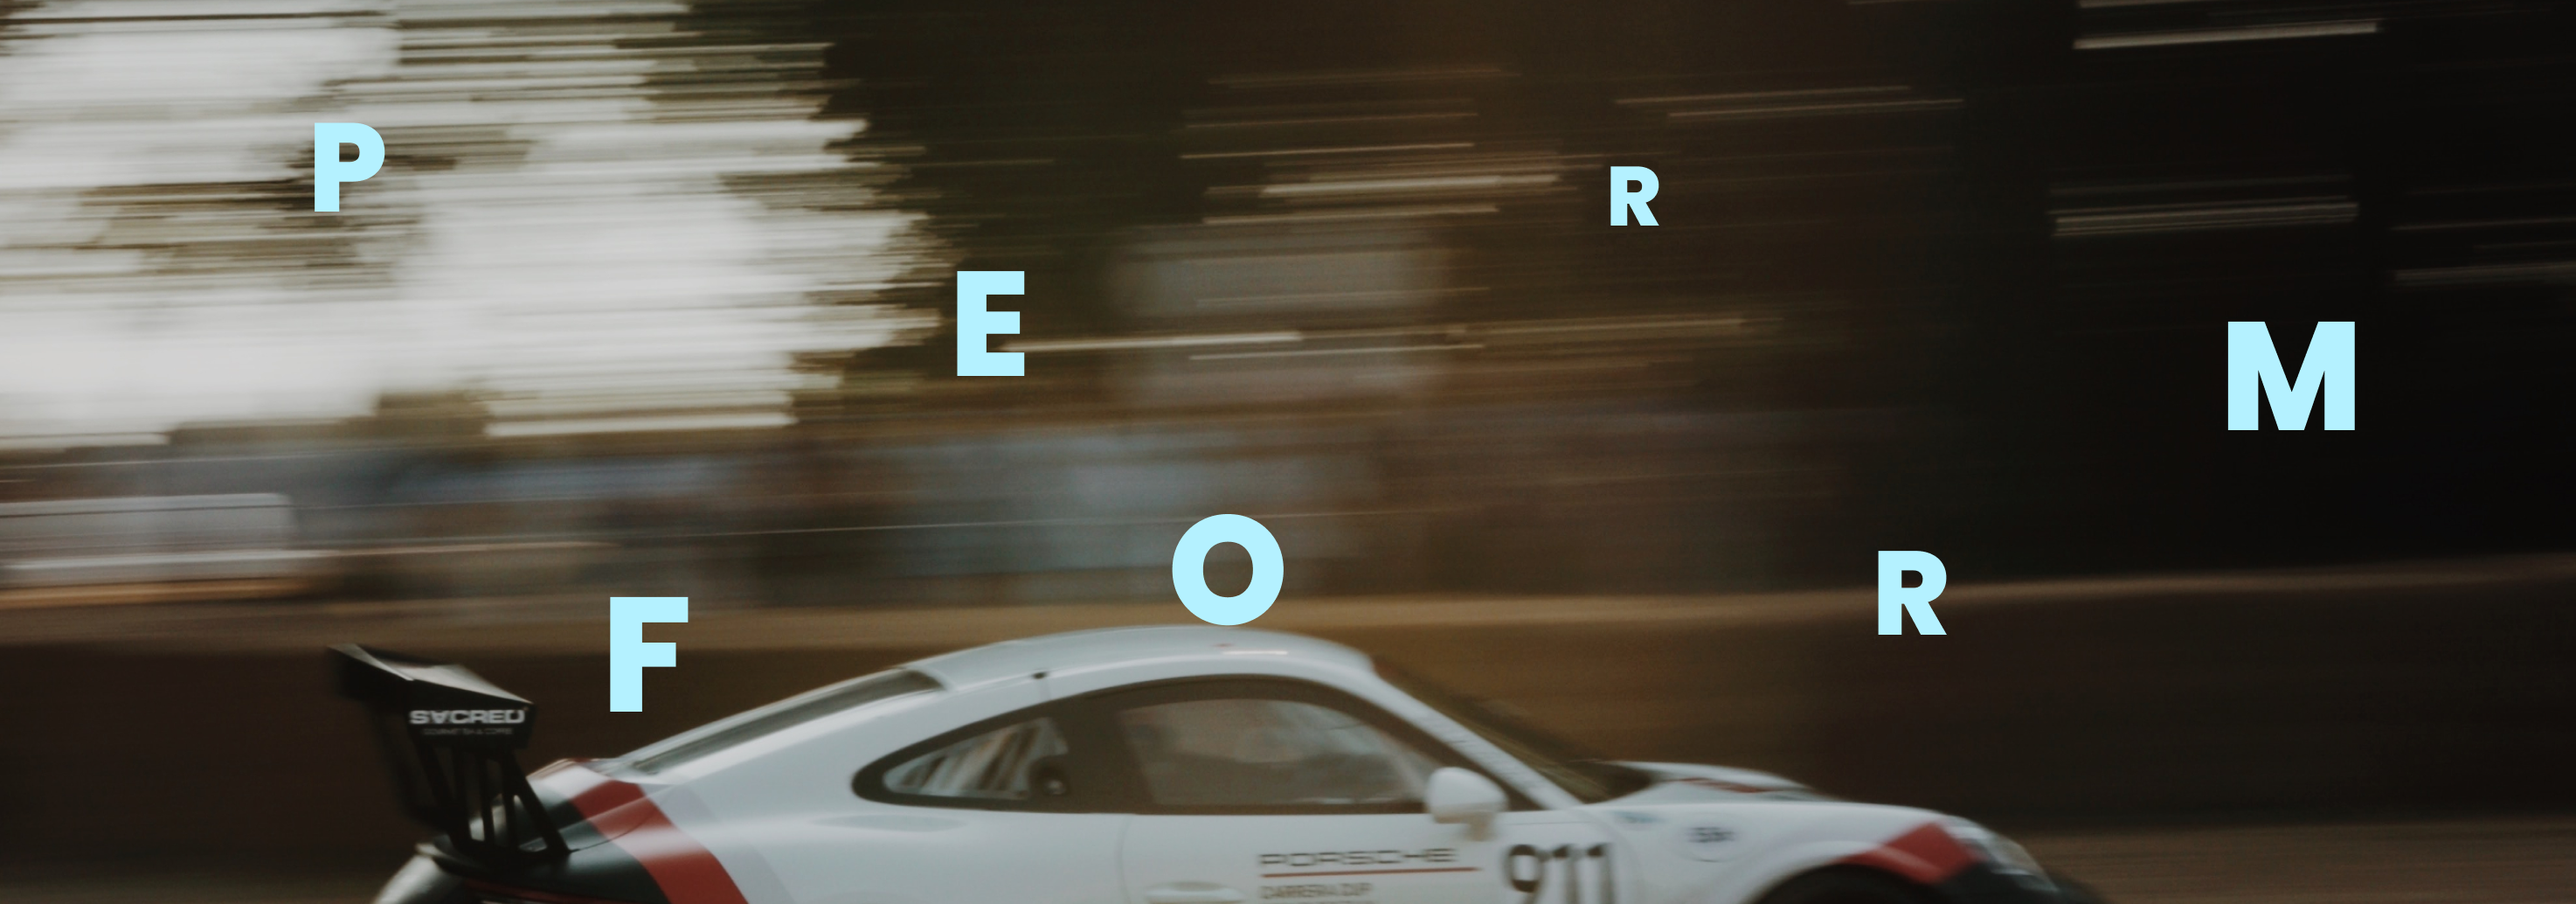 Image of a racing car with text displaying "perform" overlayed